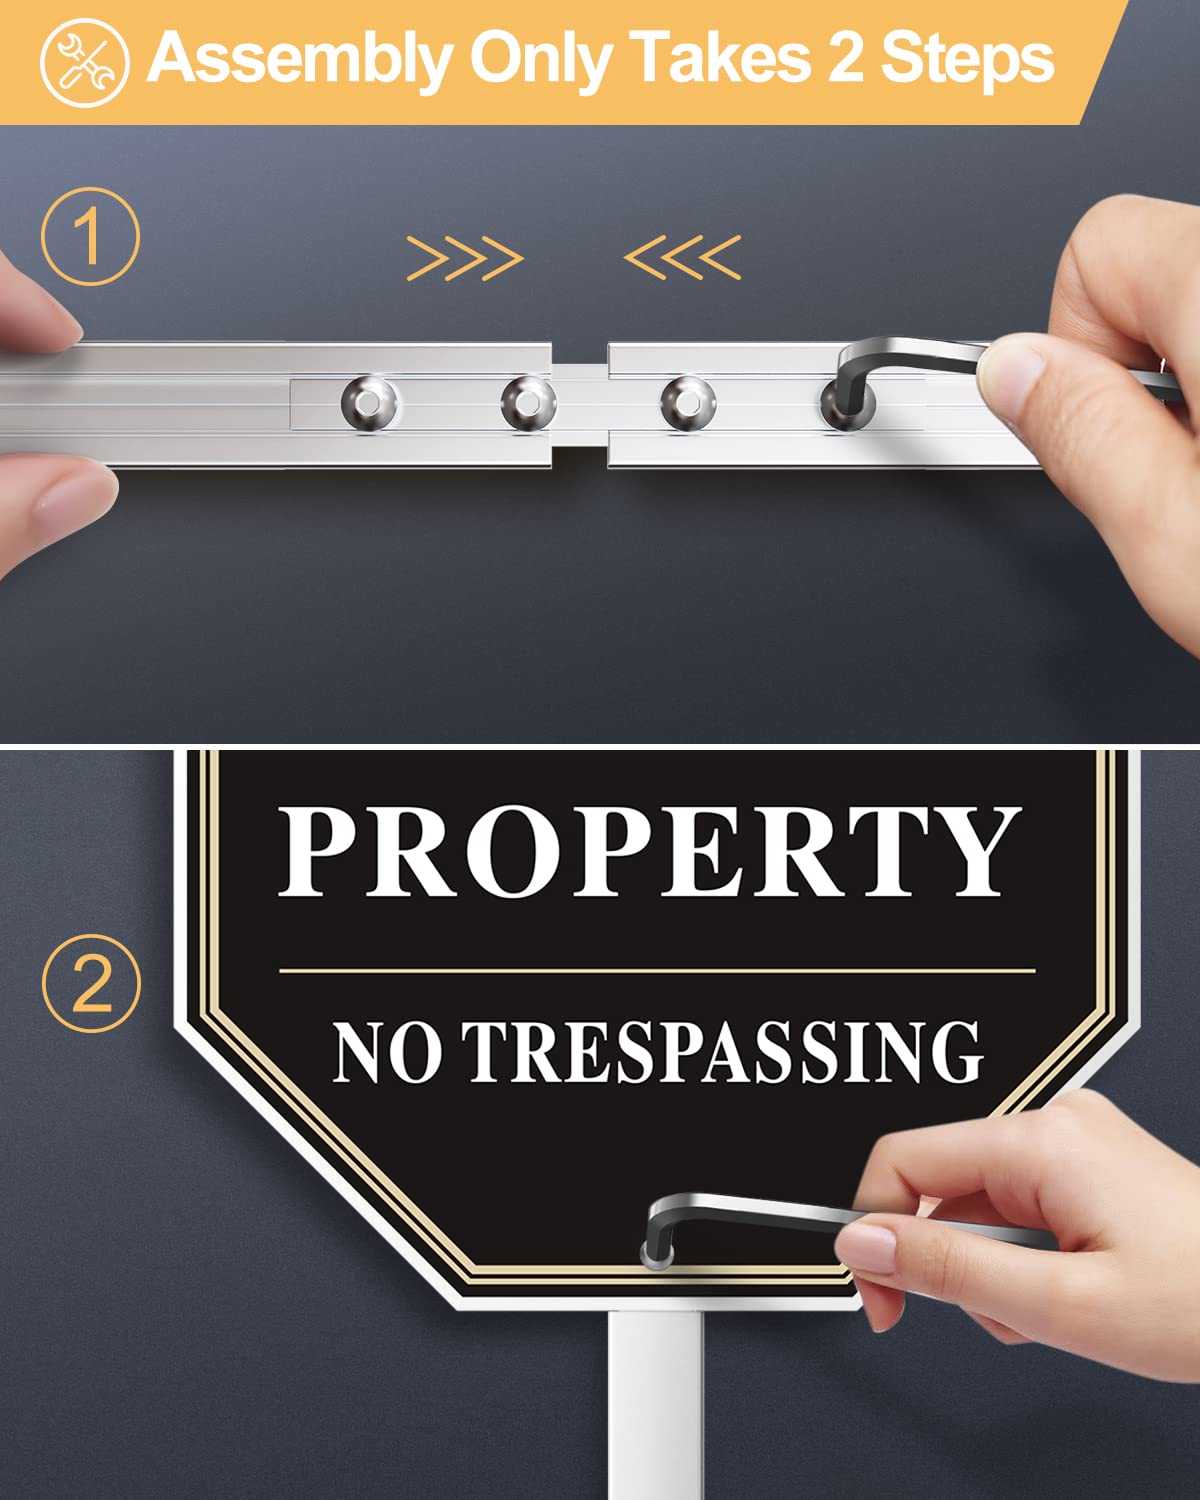 SWEETAPRIL No Trespassing Signs Private Property, All-Aluminum Yard signs, 10" x 10", 28" Metal Stakes Included